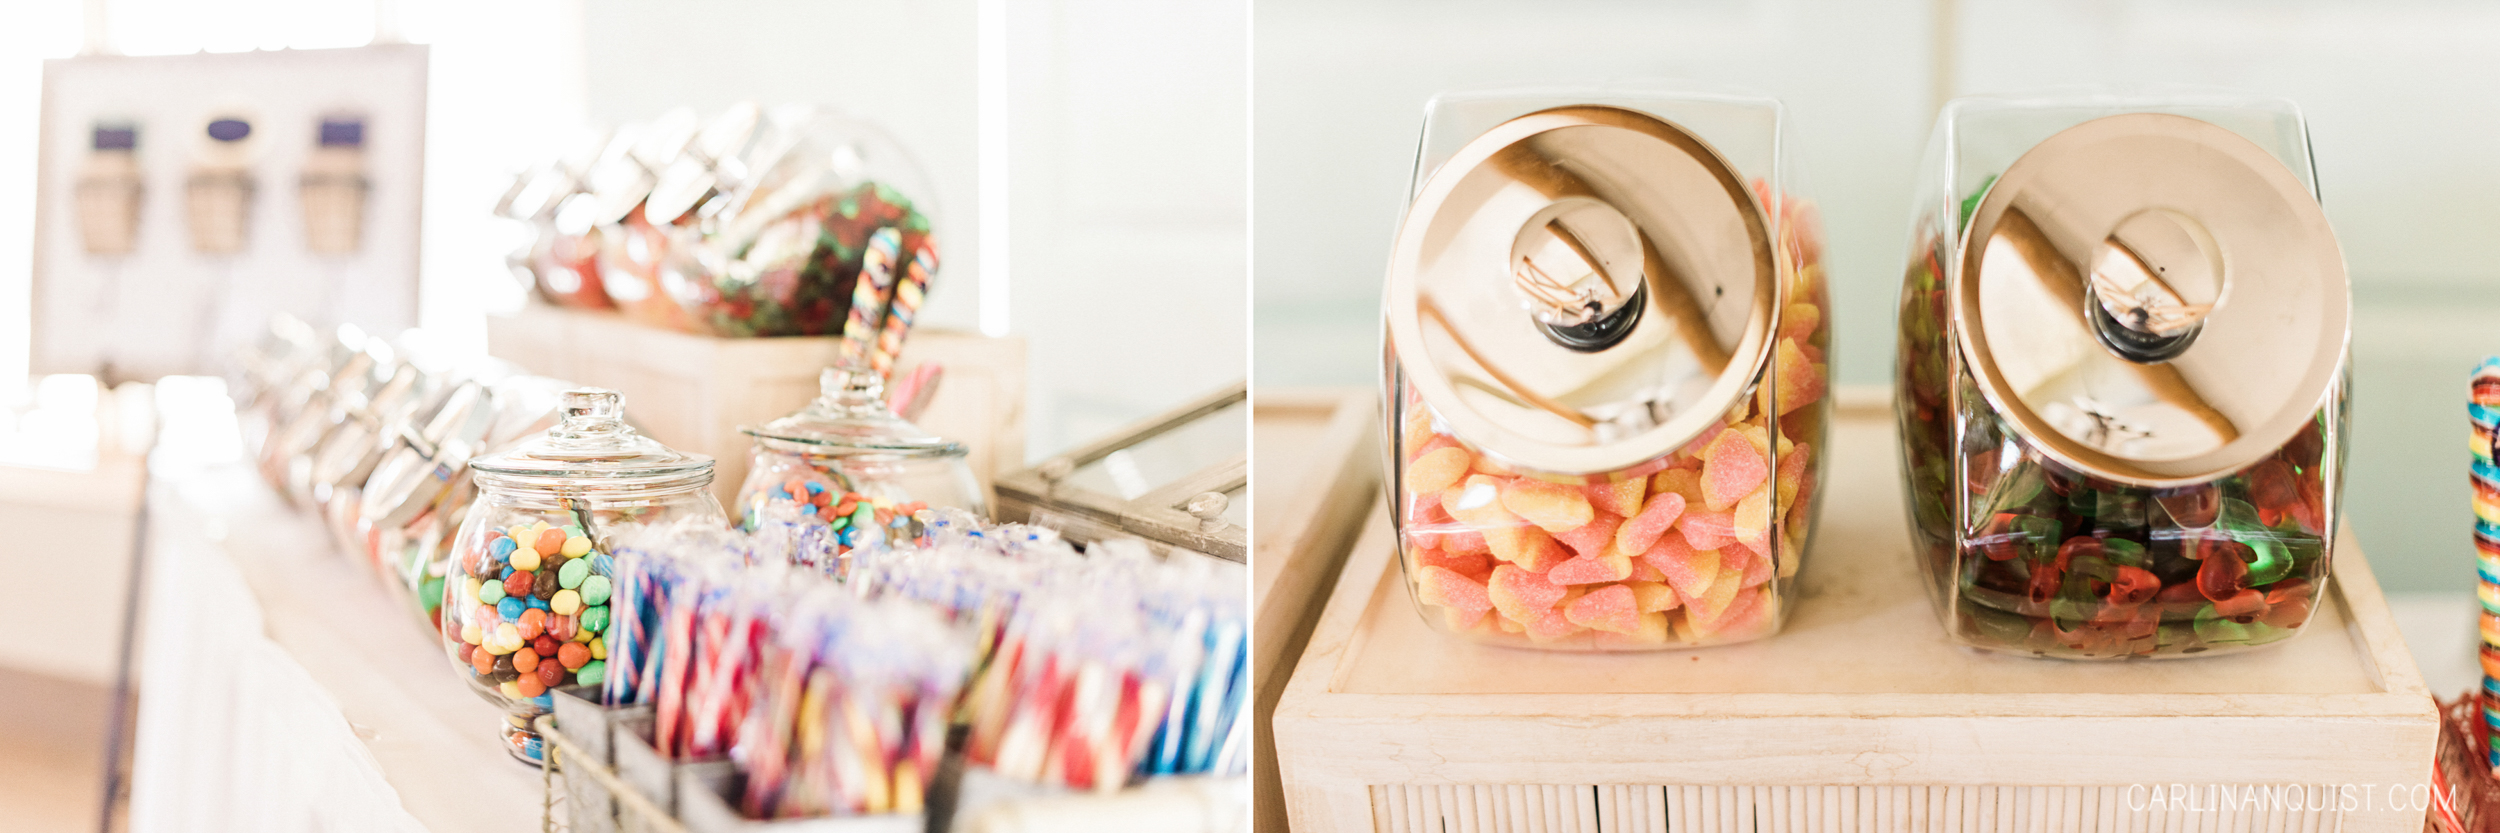 Candy Bar Wedding Favours | Carlin Anquist Photography